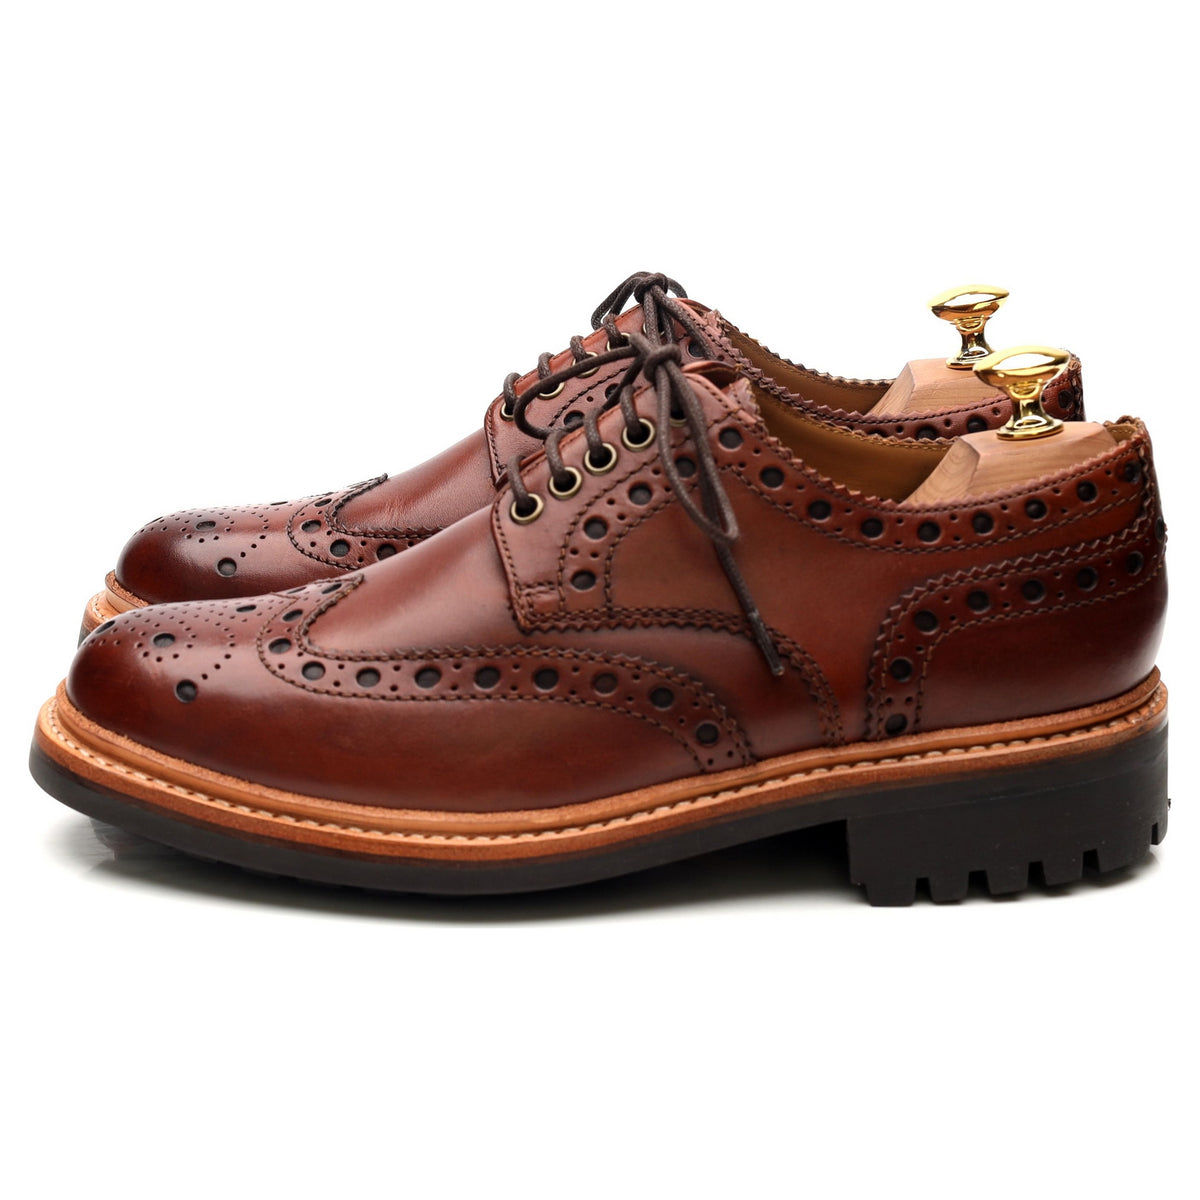 &#39;Archie&#39; Tan Brown Leather Derby Brogues UK 6.5 G